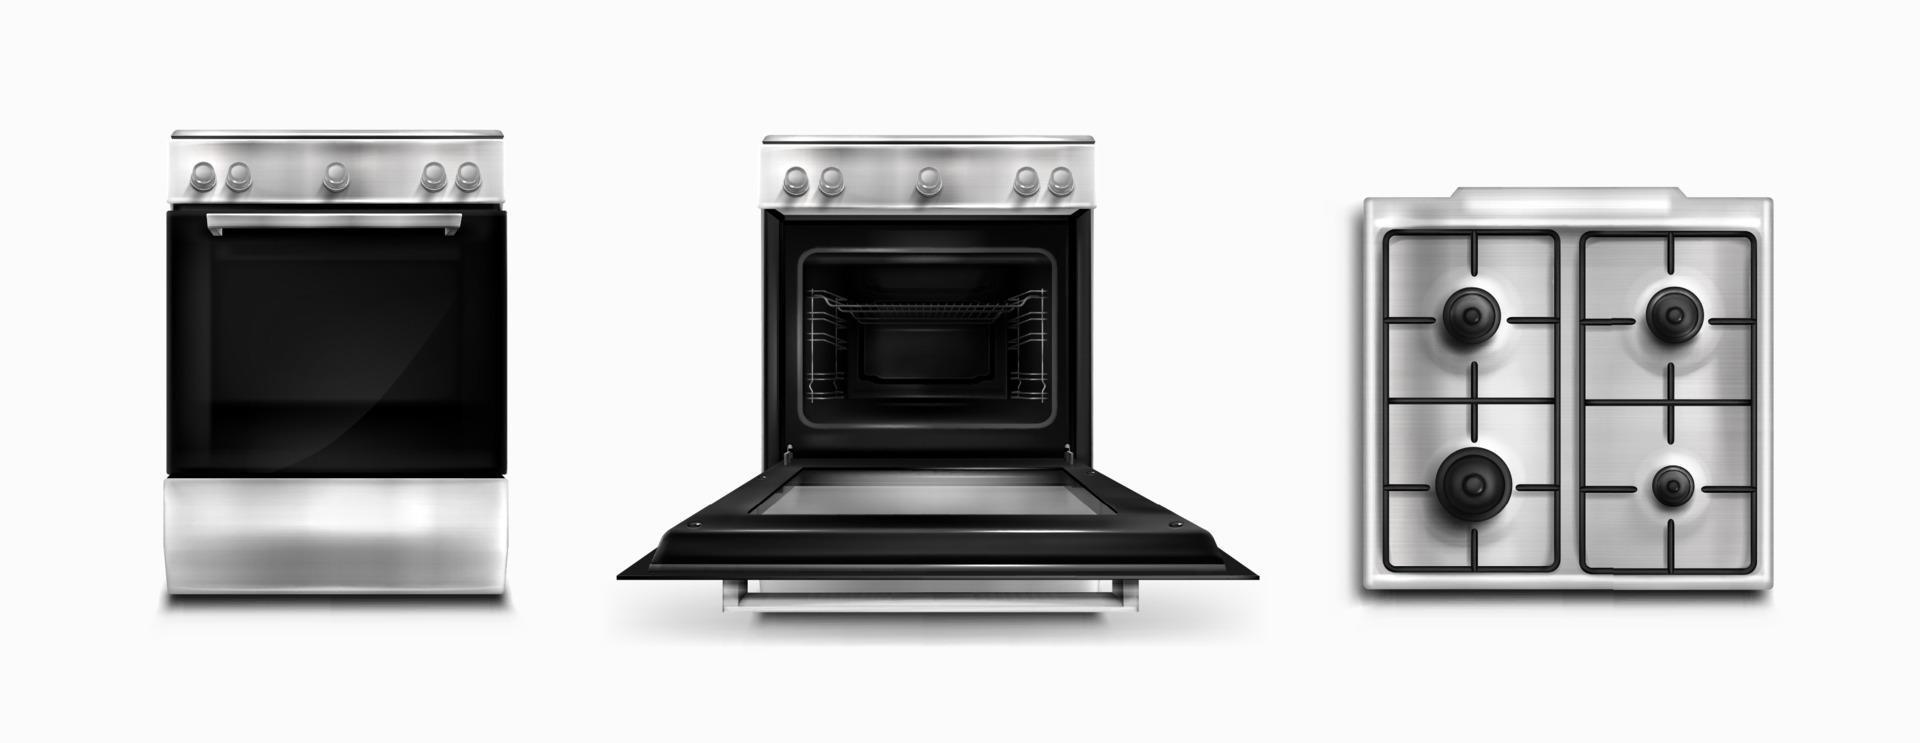 Oven, electric and gas kitchen appliances top view vector